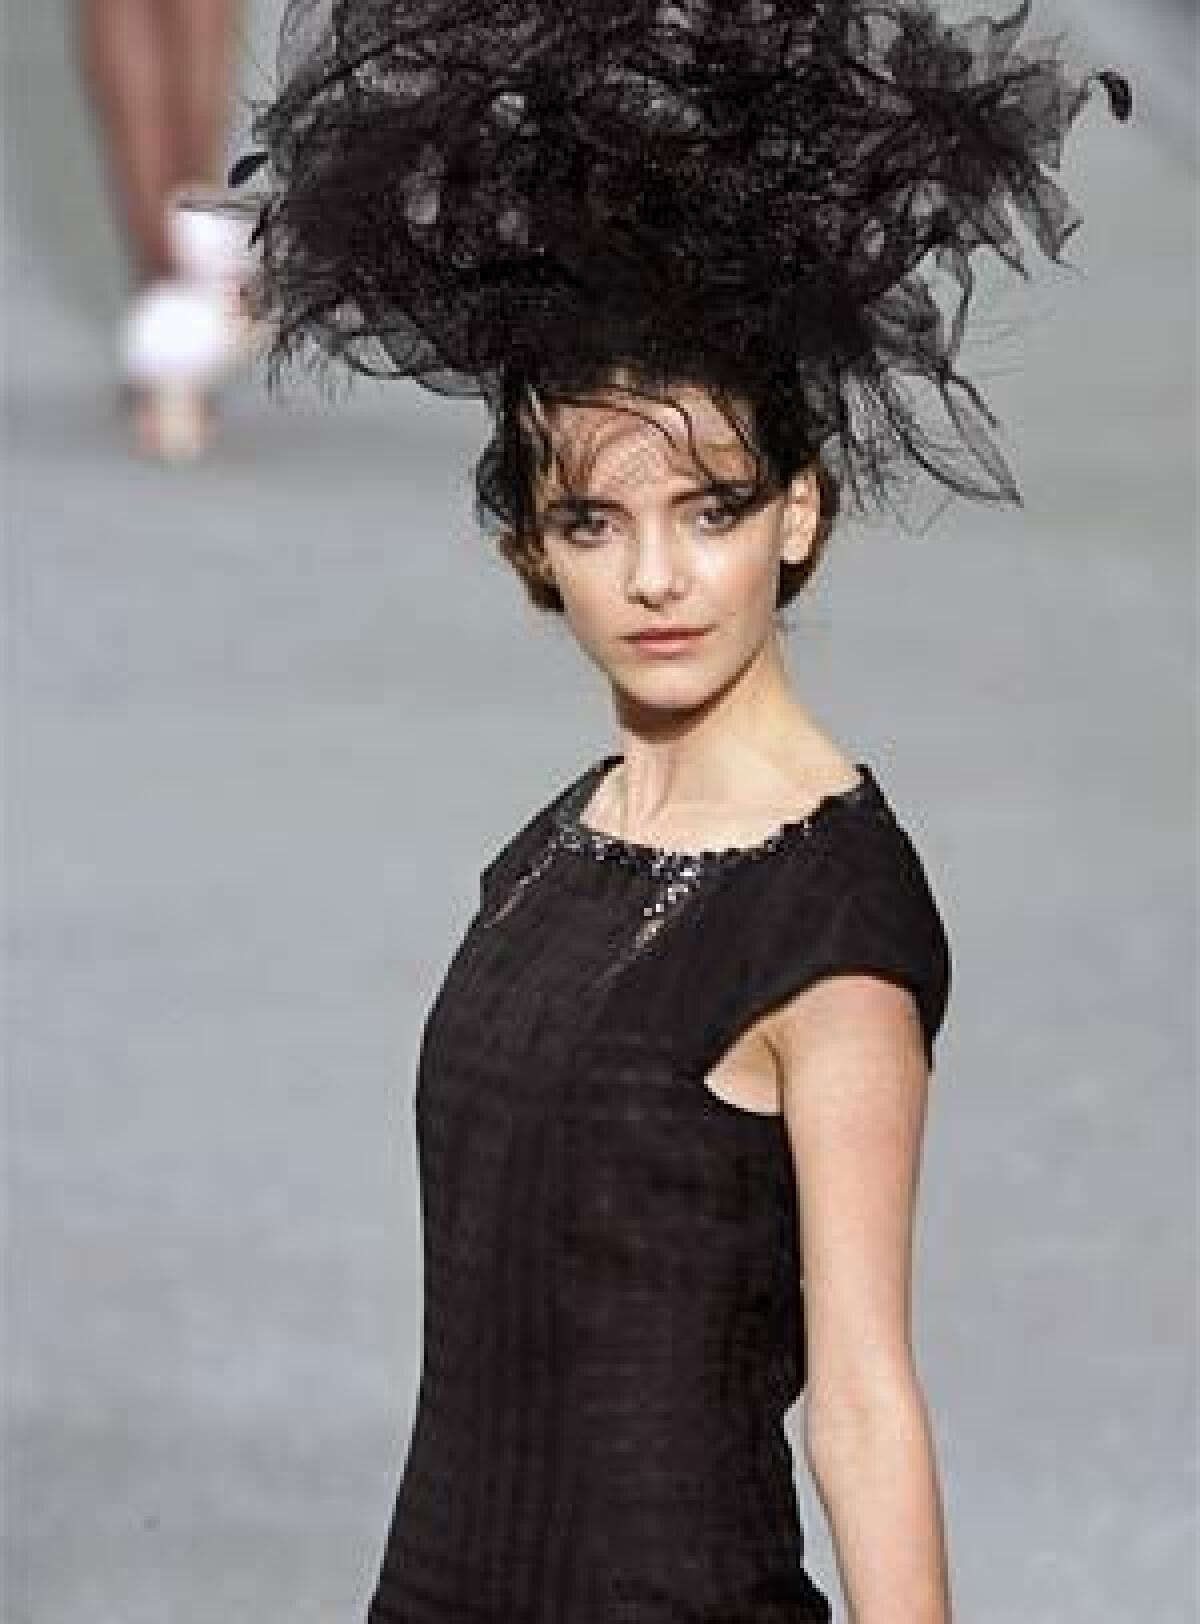 A model dawns an outfit from Chanels Spring 2009 collection at La Mode de France.